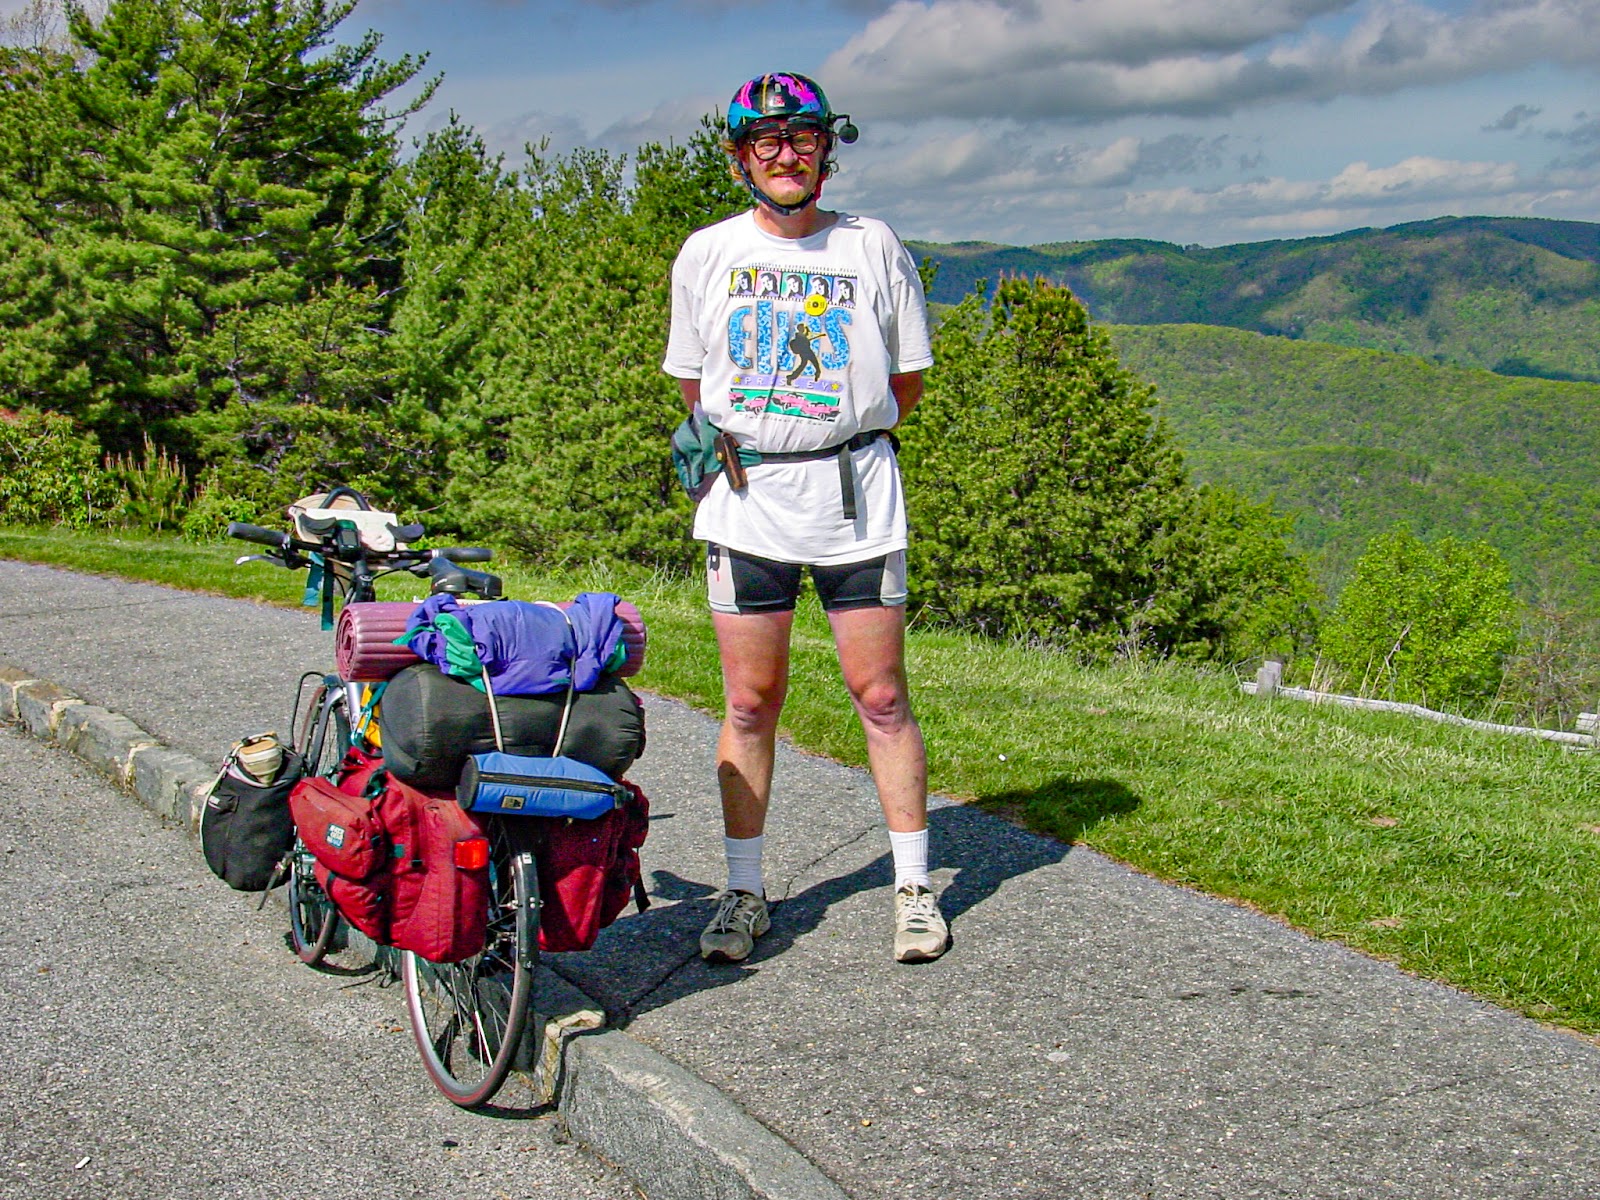 Cyclist stands by his bike wearing his helmet and Elvis t-shirt